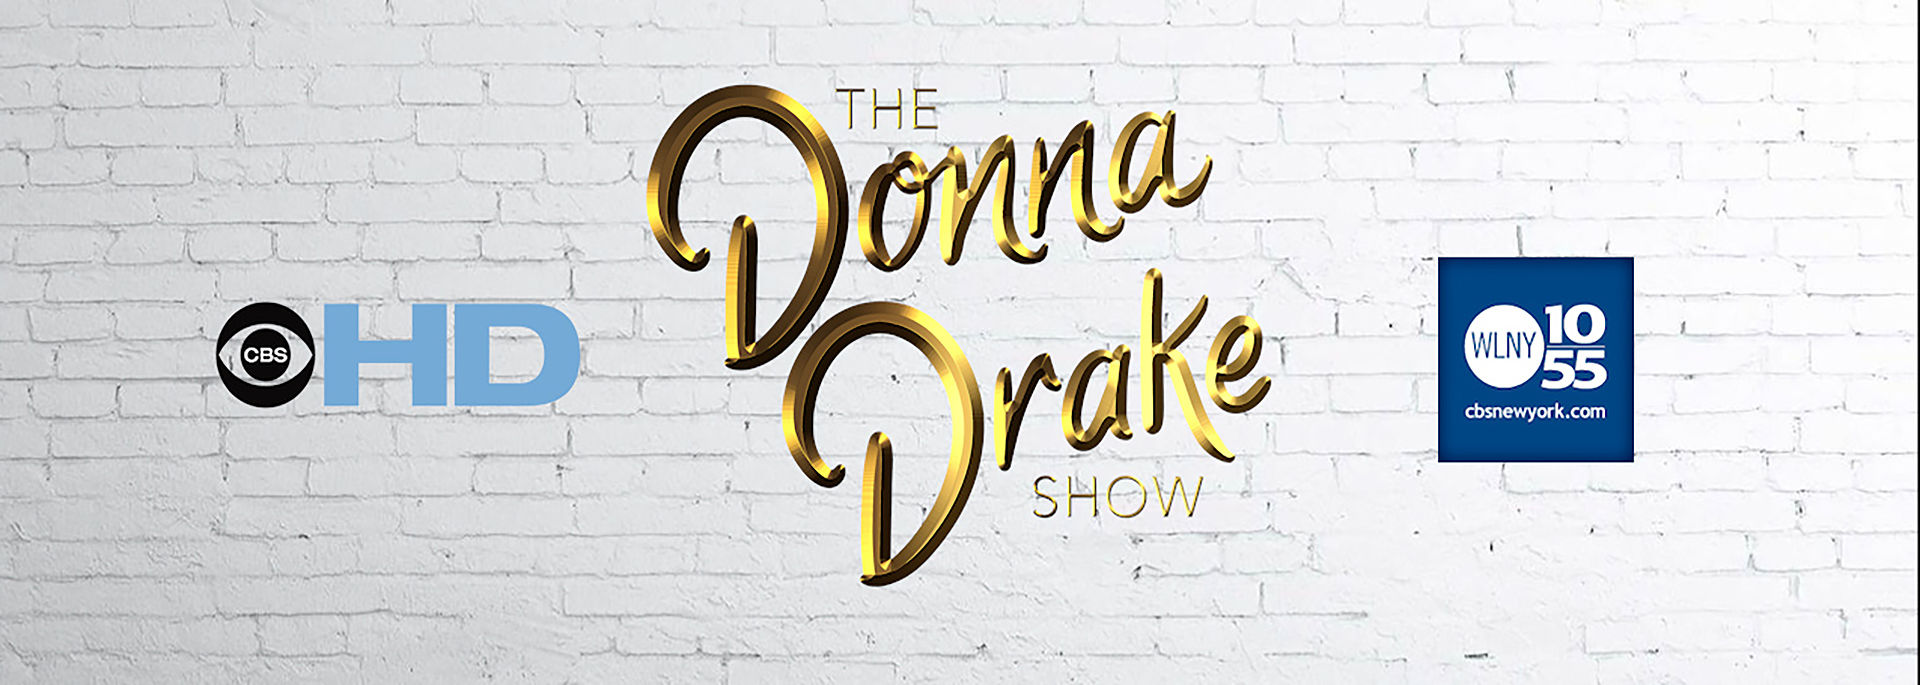 The DONNA DRAKE Show Live It Up! channel